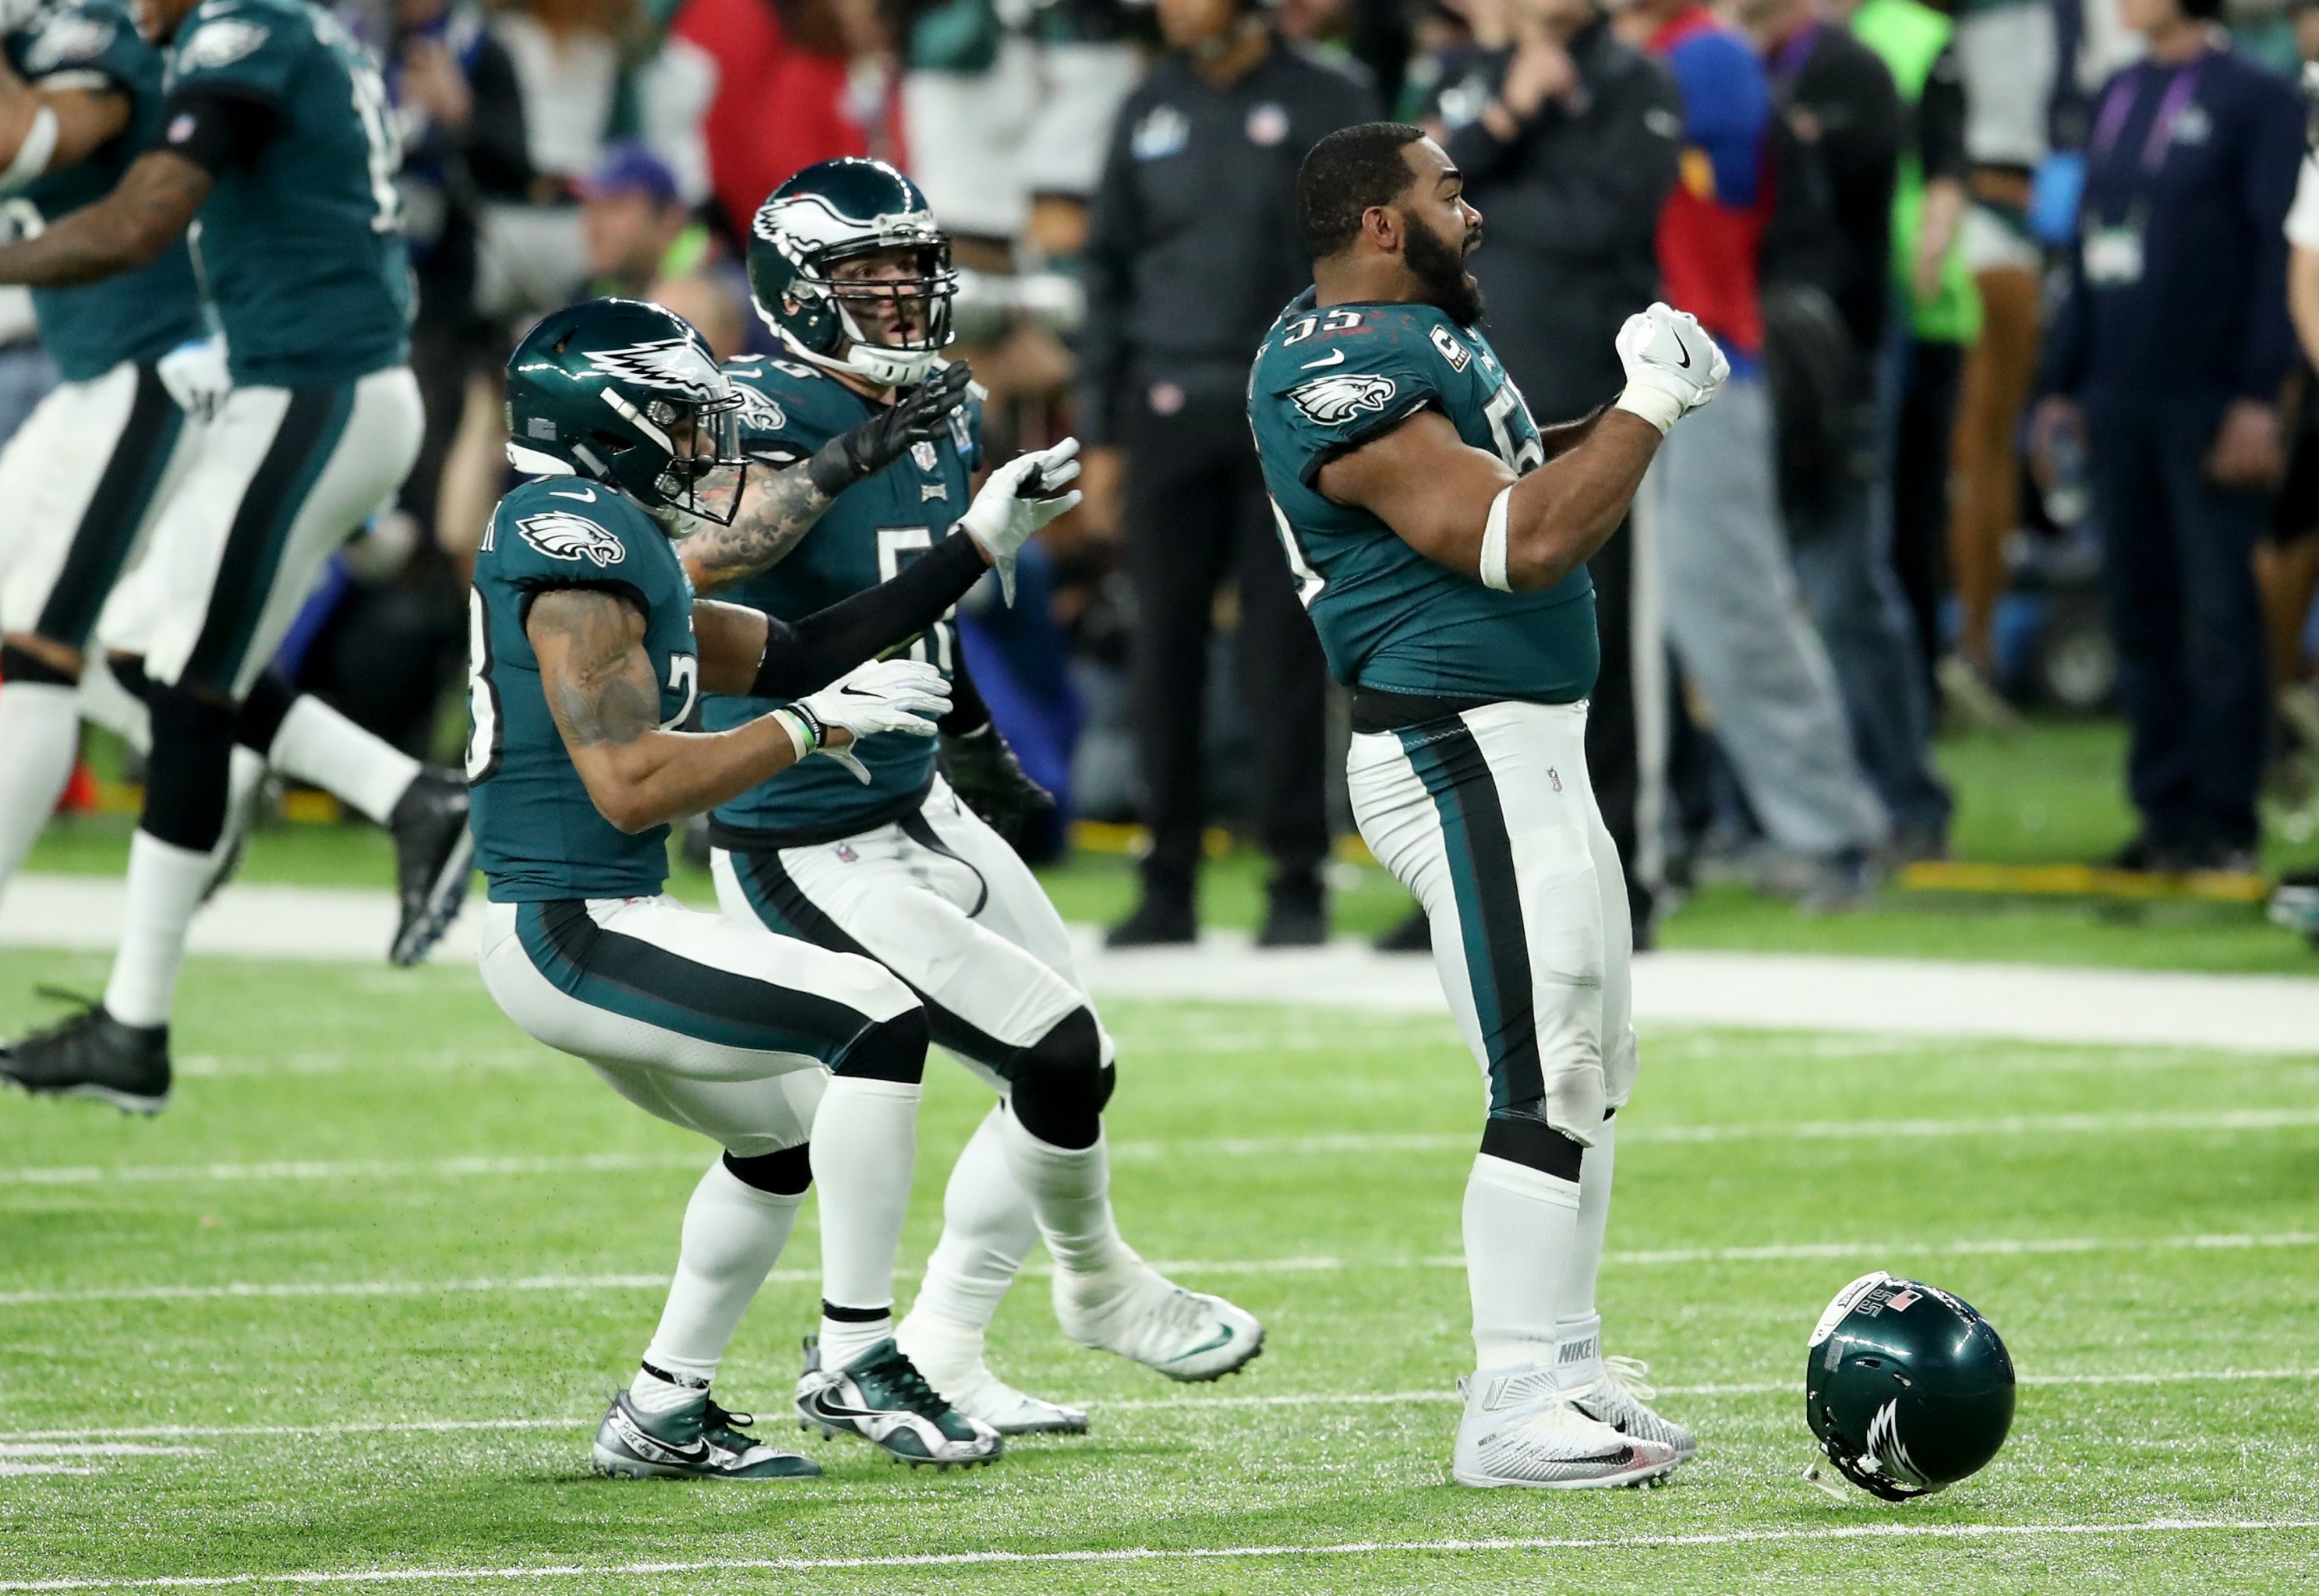 Changing its Feathers: The Evolution of the Philadelphia Eagles